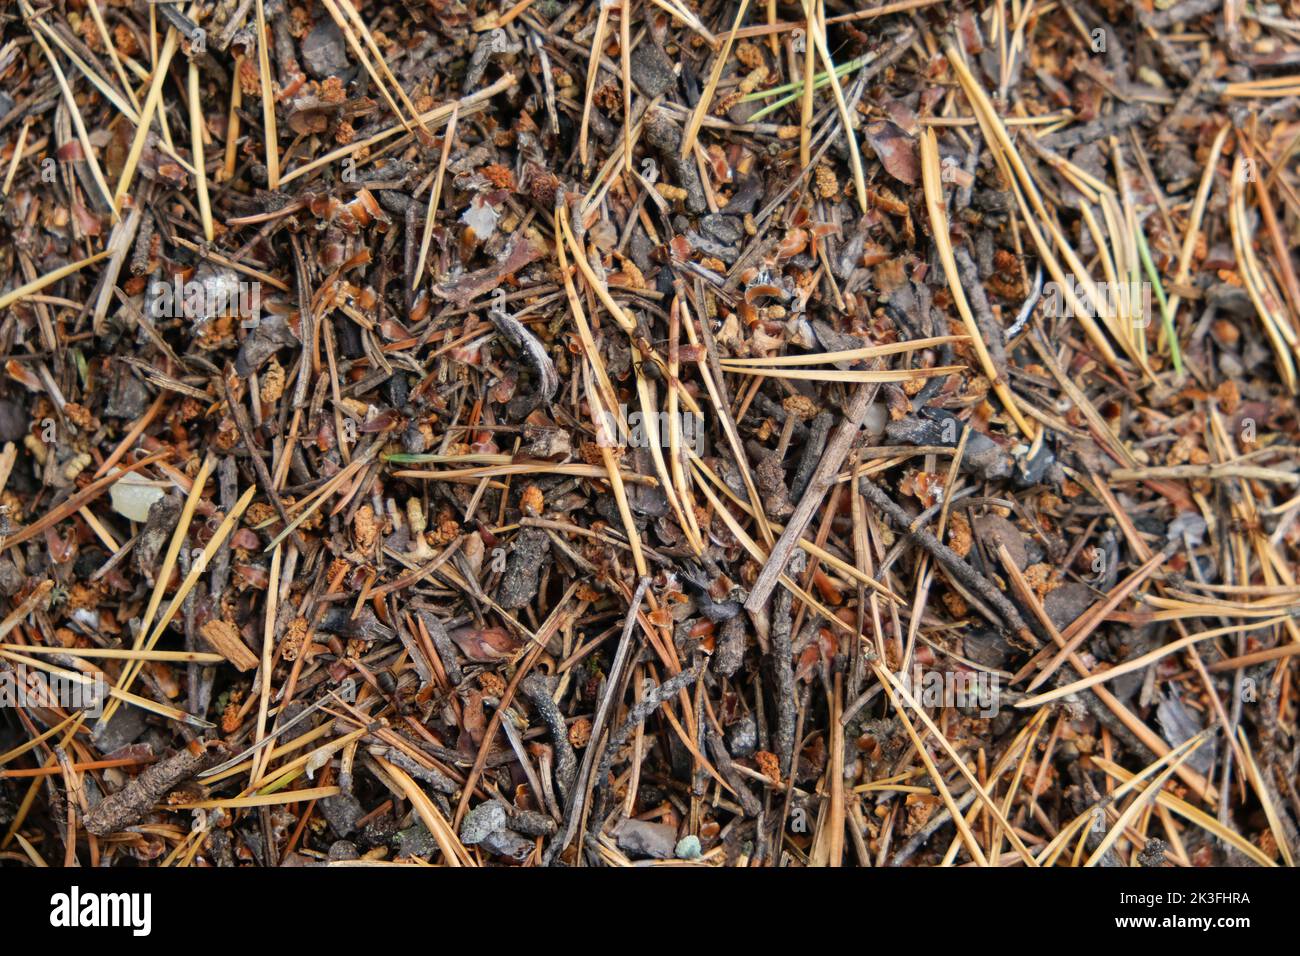 An anthill with a colony of ants in close-up. An anthill in a pine coniferous forest. Stock Photo